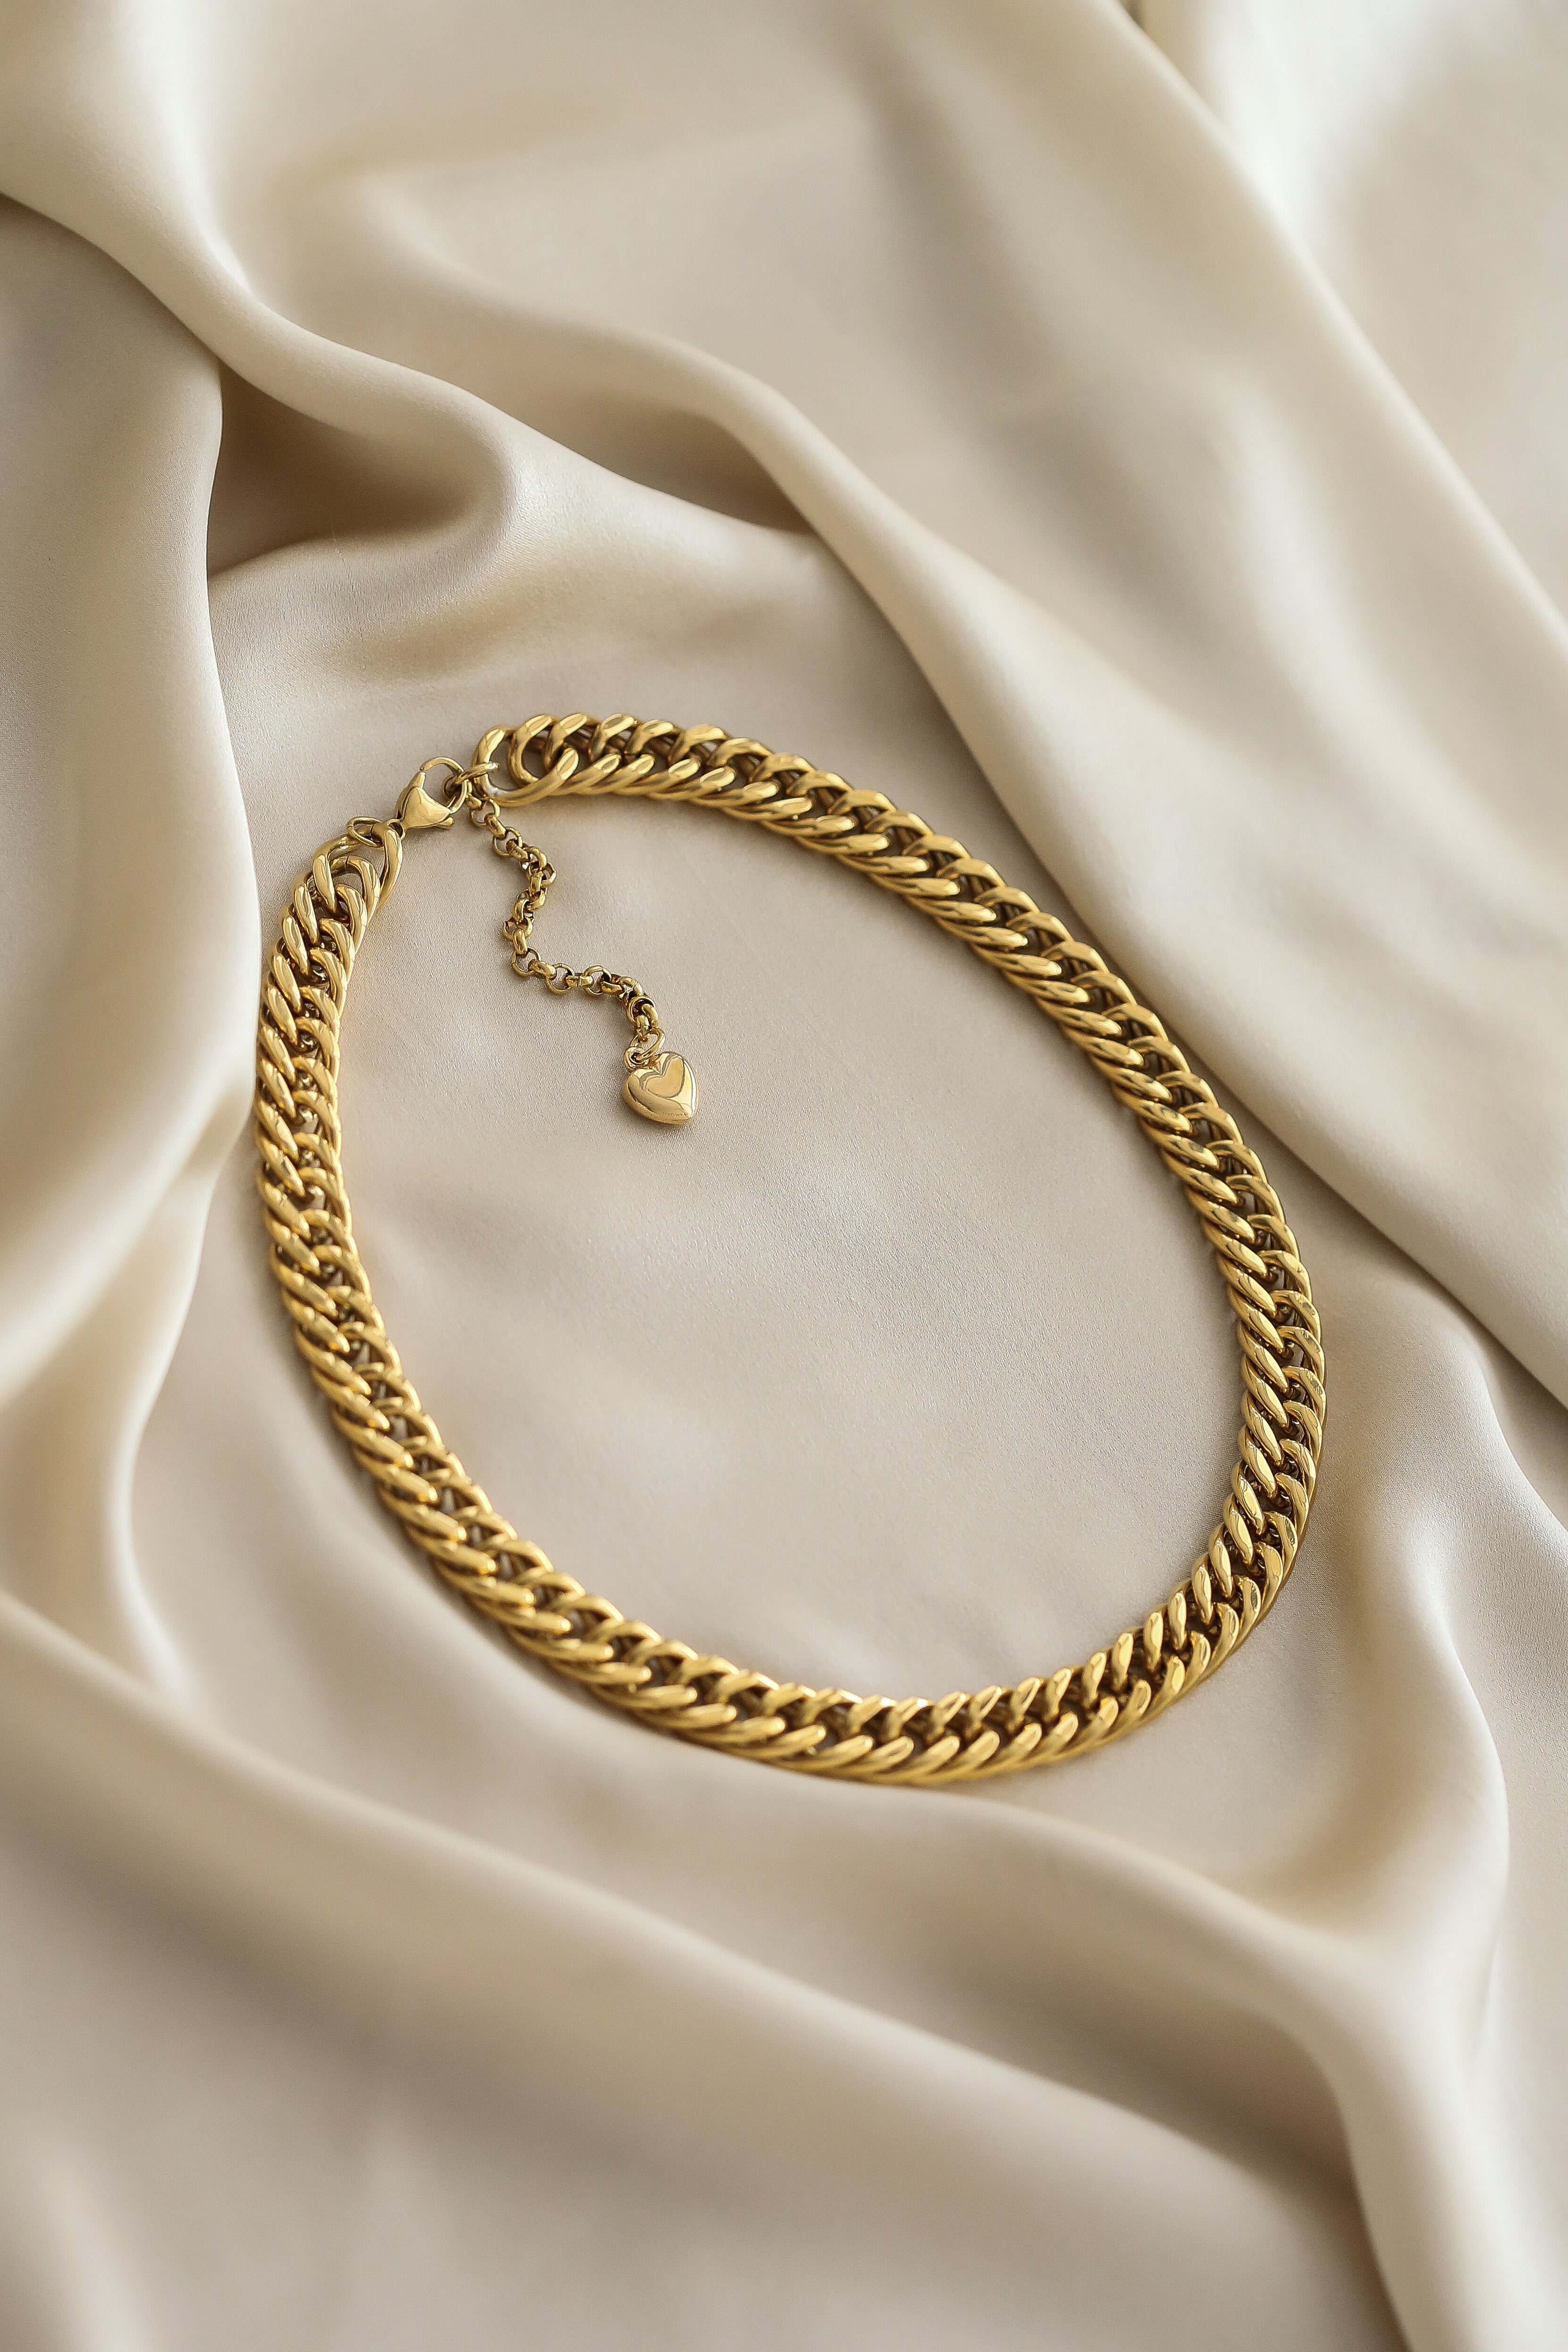 Kim Necklace - Boutique Minimaliste has waterproof, durable, elegant and vintage inspired jewelry